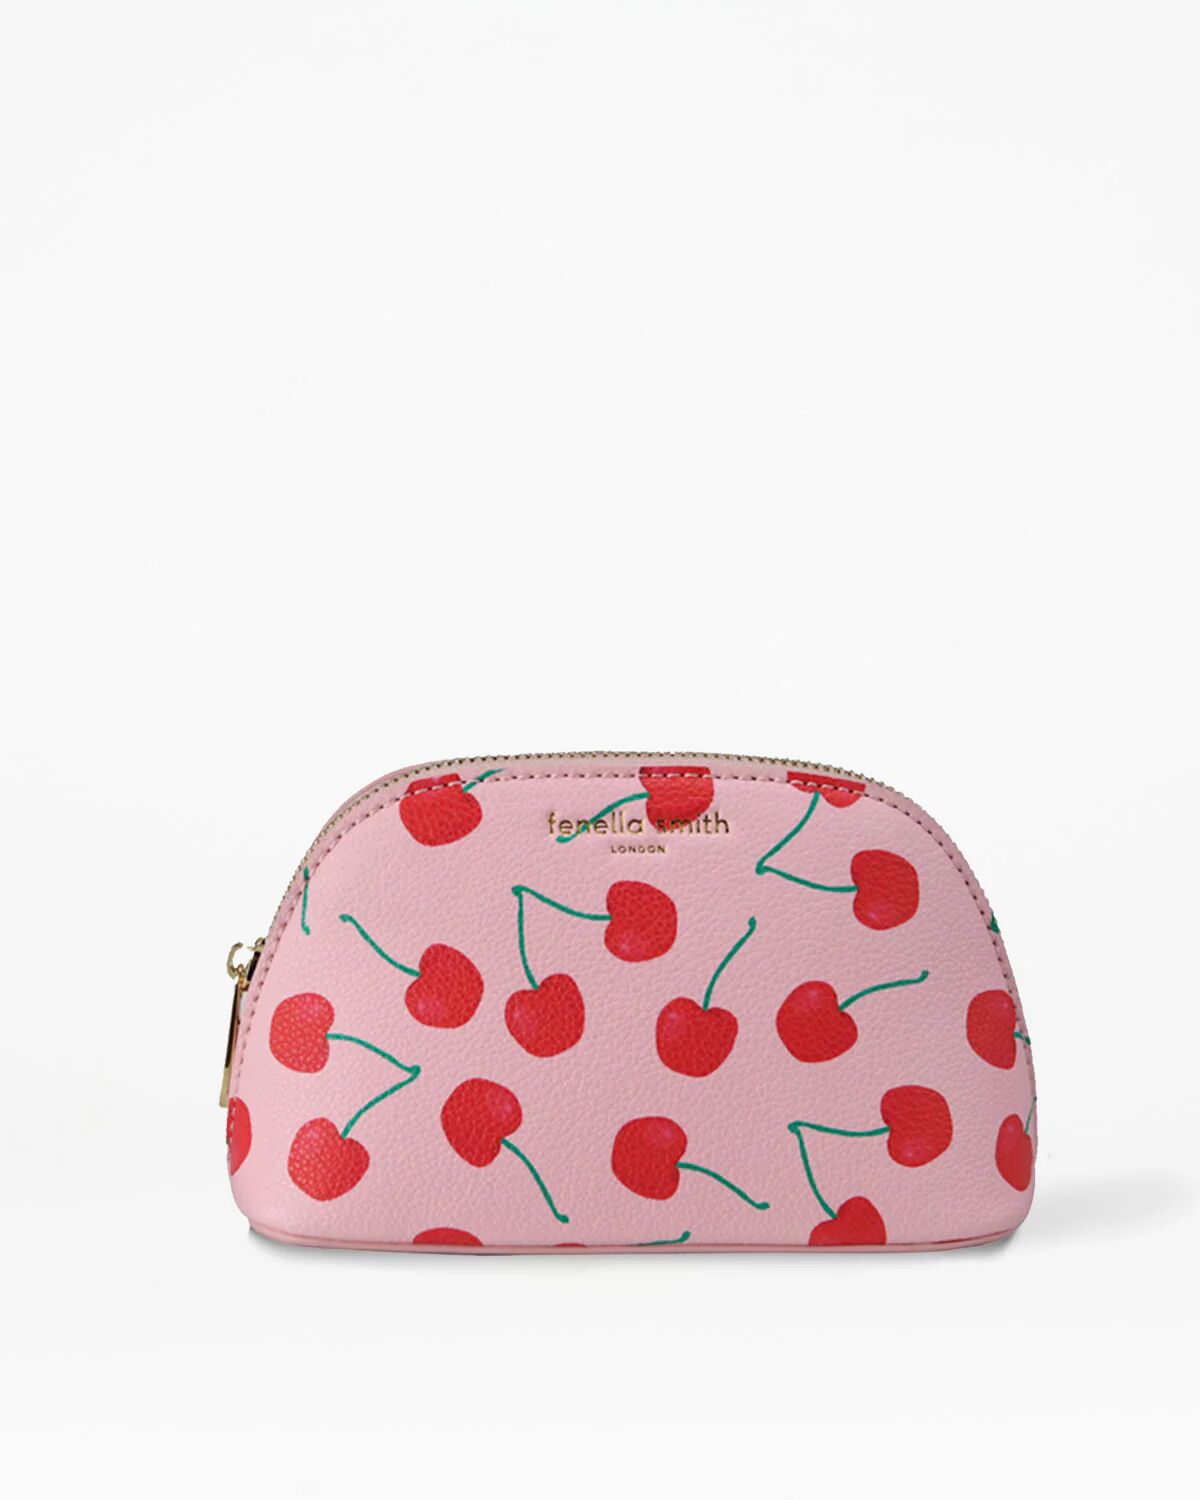 Fenella Smith Recycled Cherry Oyster Cosmetic Case Unisex